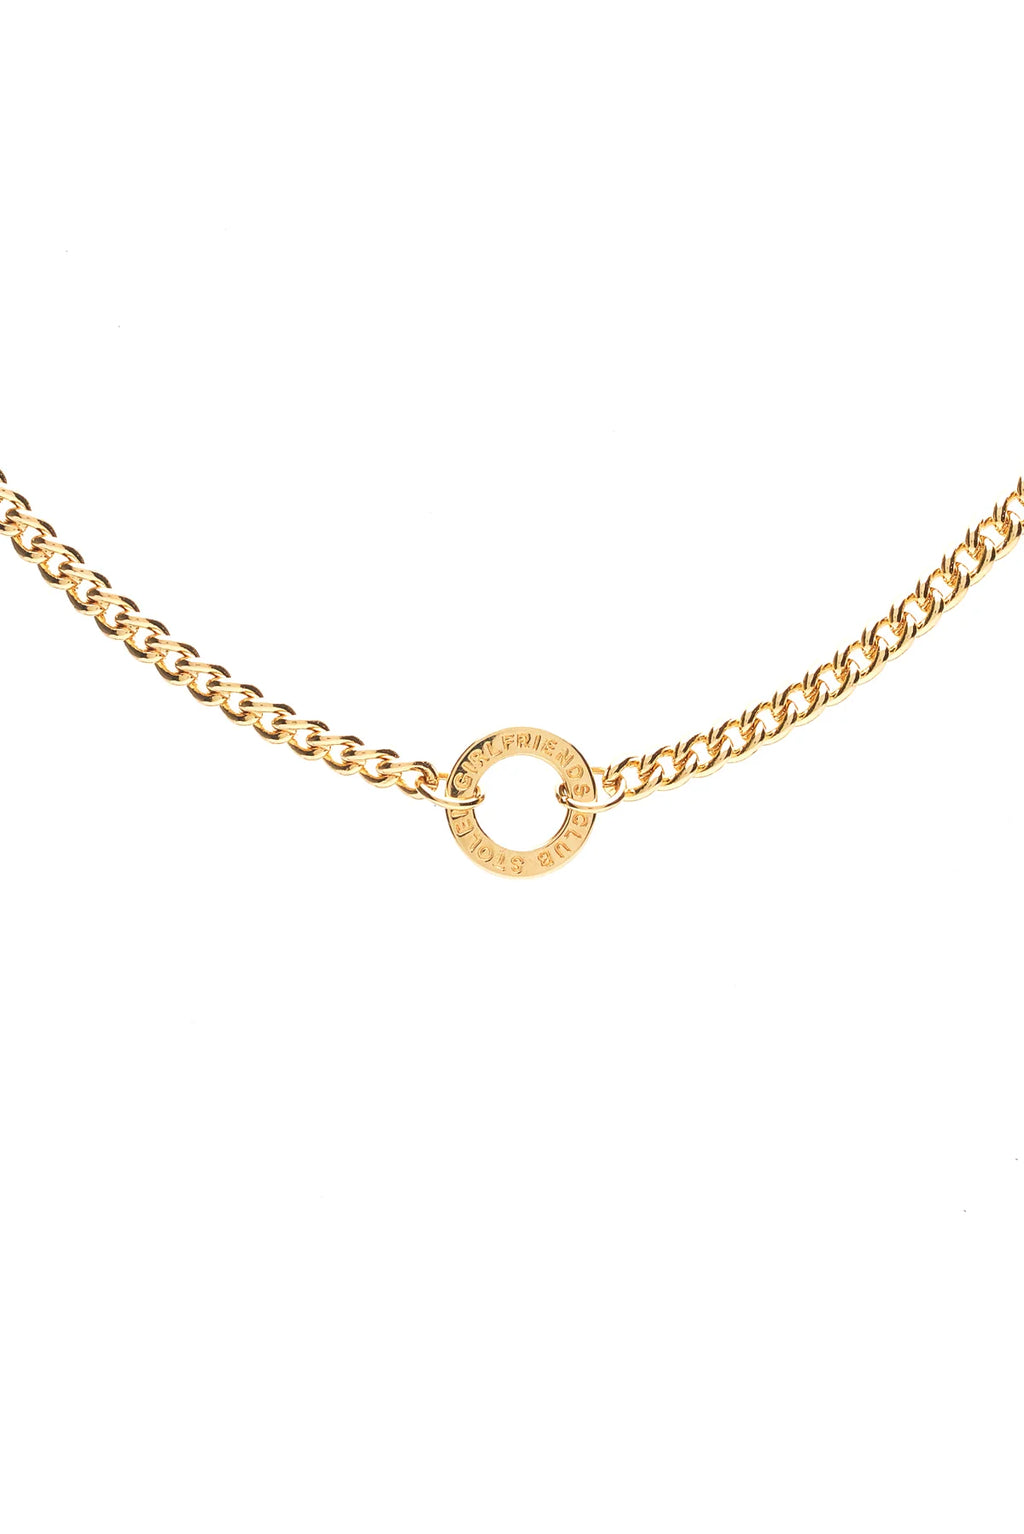 Stolen Girlfriends Club Halo Necklace - Gold Plated